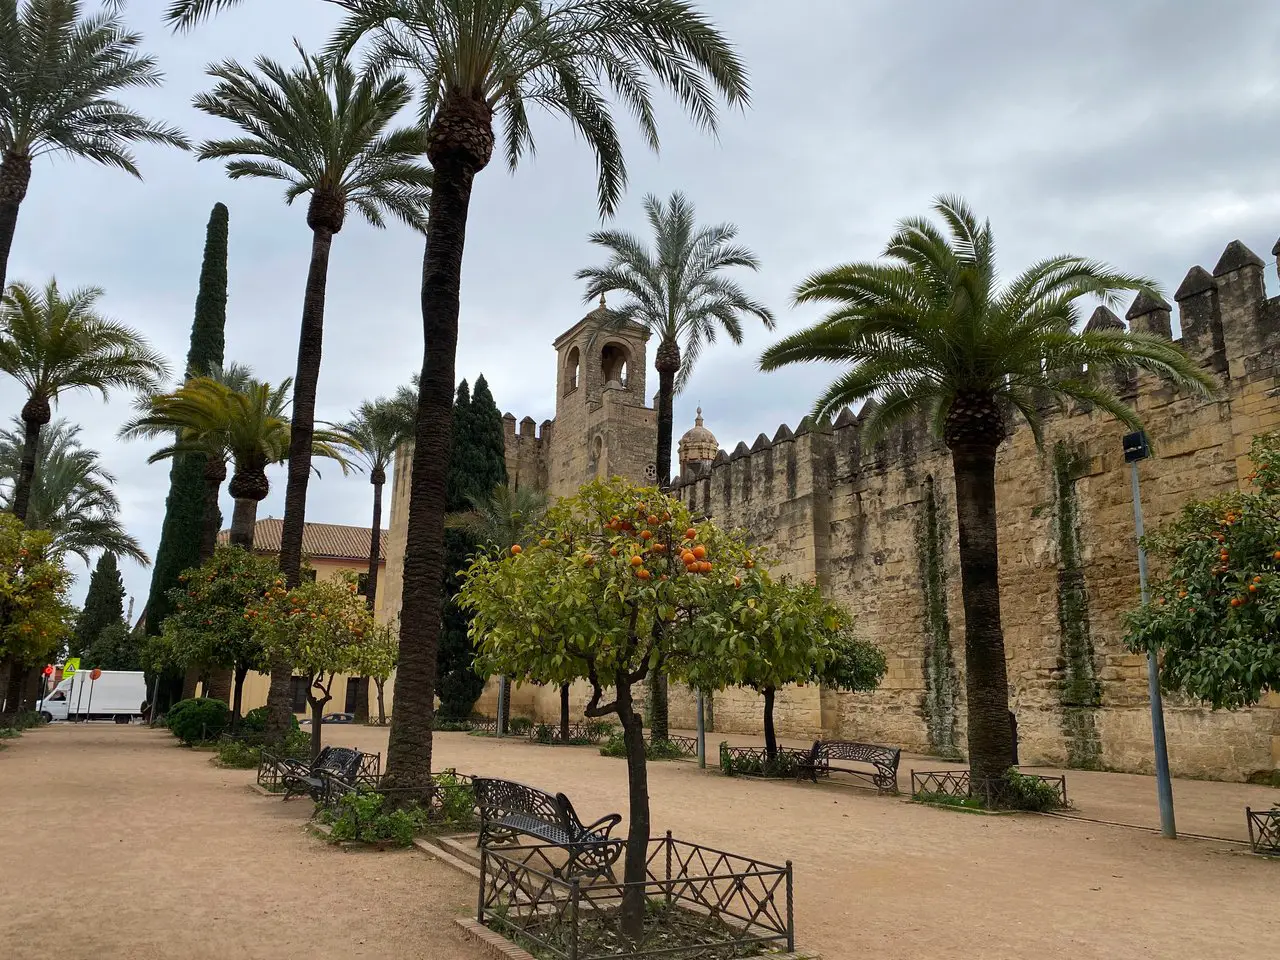 The courtyard in front of the Cordoba Alcazar